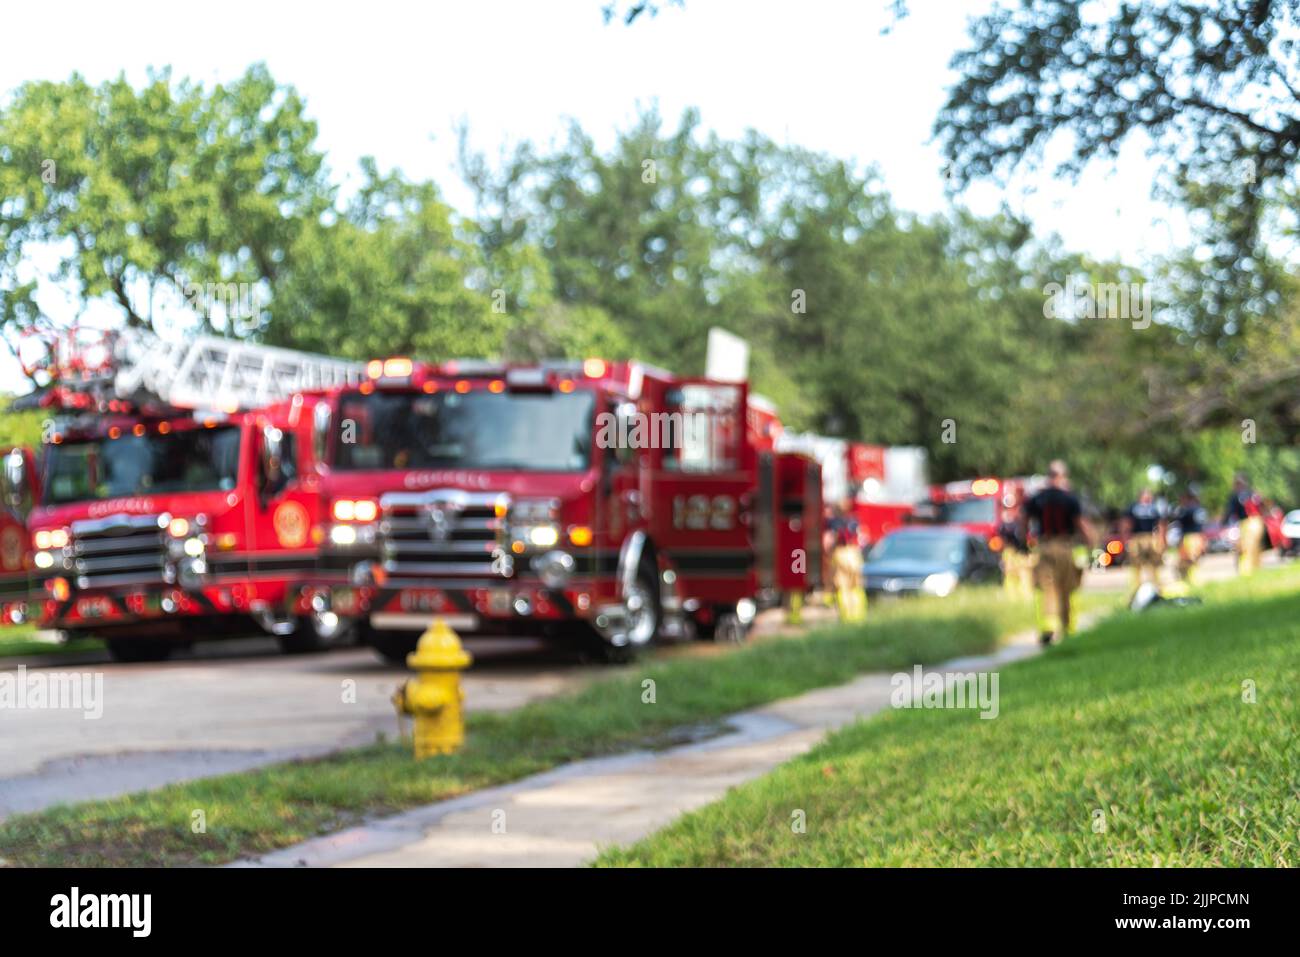 Red fire trucks with ladders and working firefighters at a residential house in suburbs Dallas, Texas, America Stock Photo